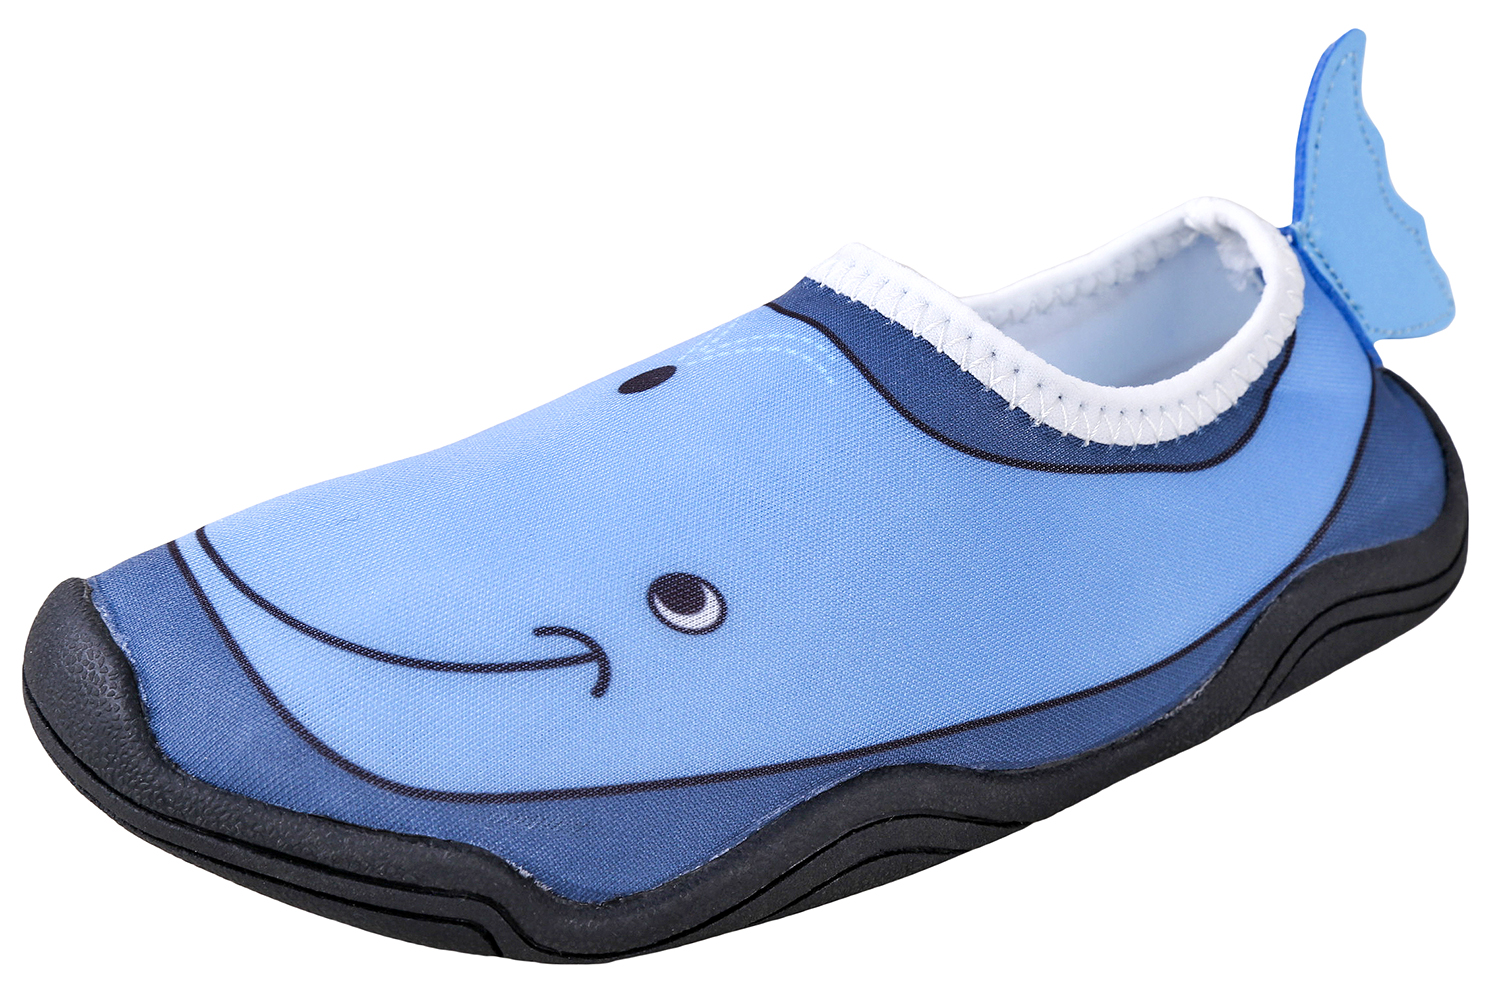 Lil' Fins Kids Water Shoes - Beach Shoes | Summer Fun | 3D Toddler Water Shoes Kids | Quick Dry | Swim Shoes Whale 10/11 M US - image 1 of 5